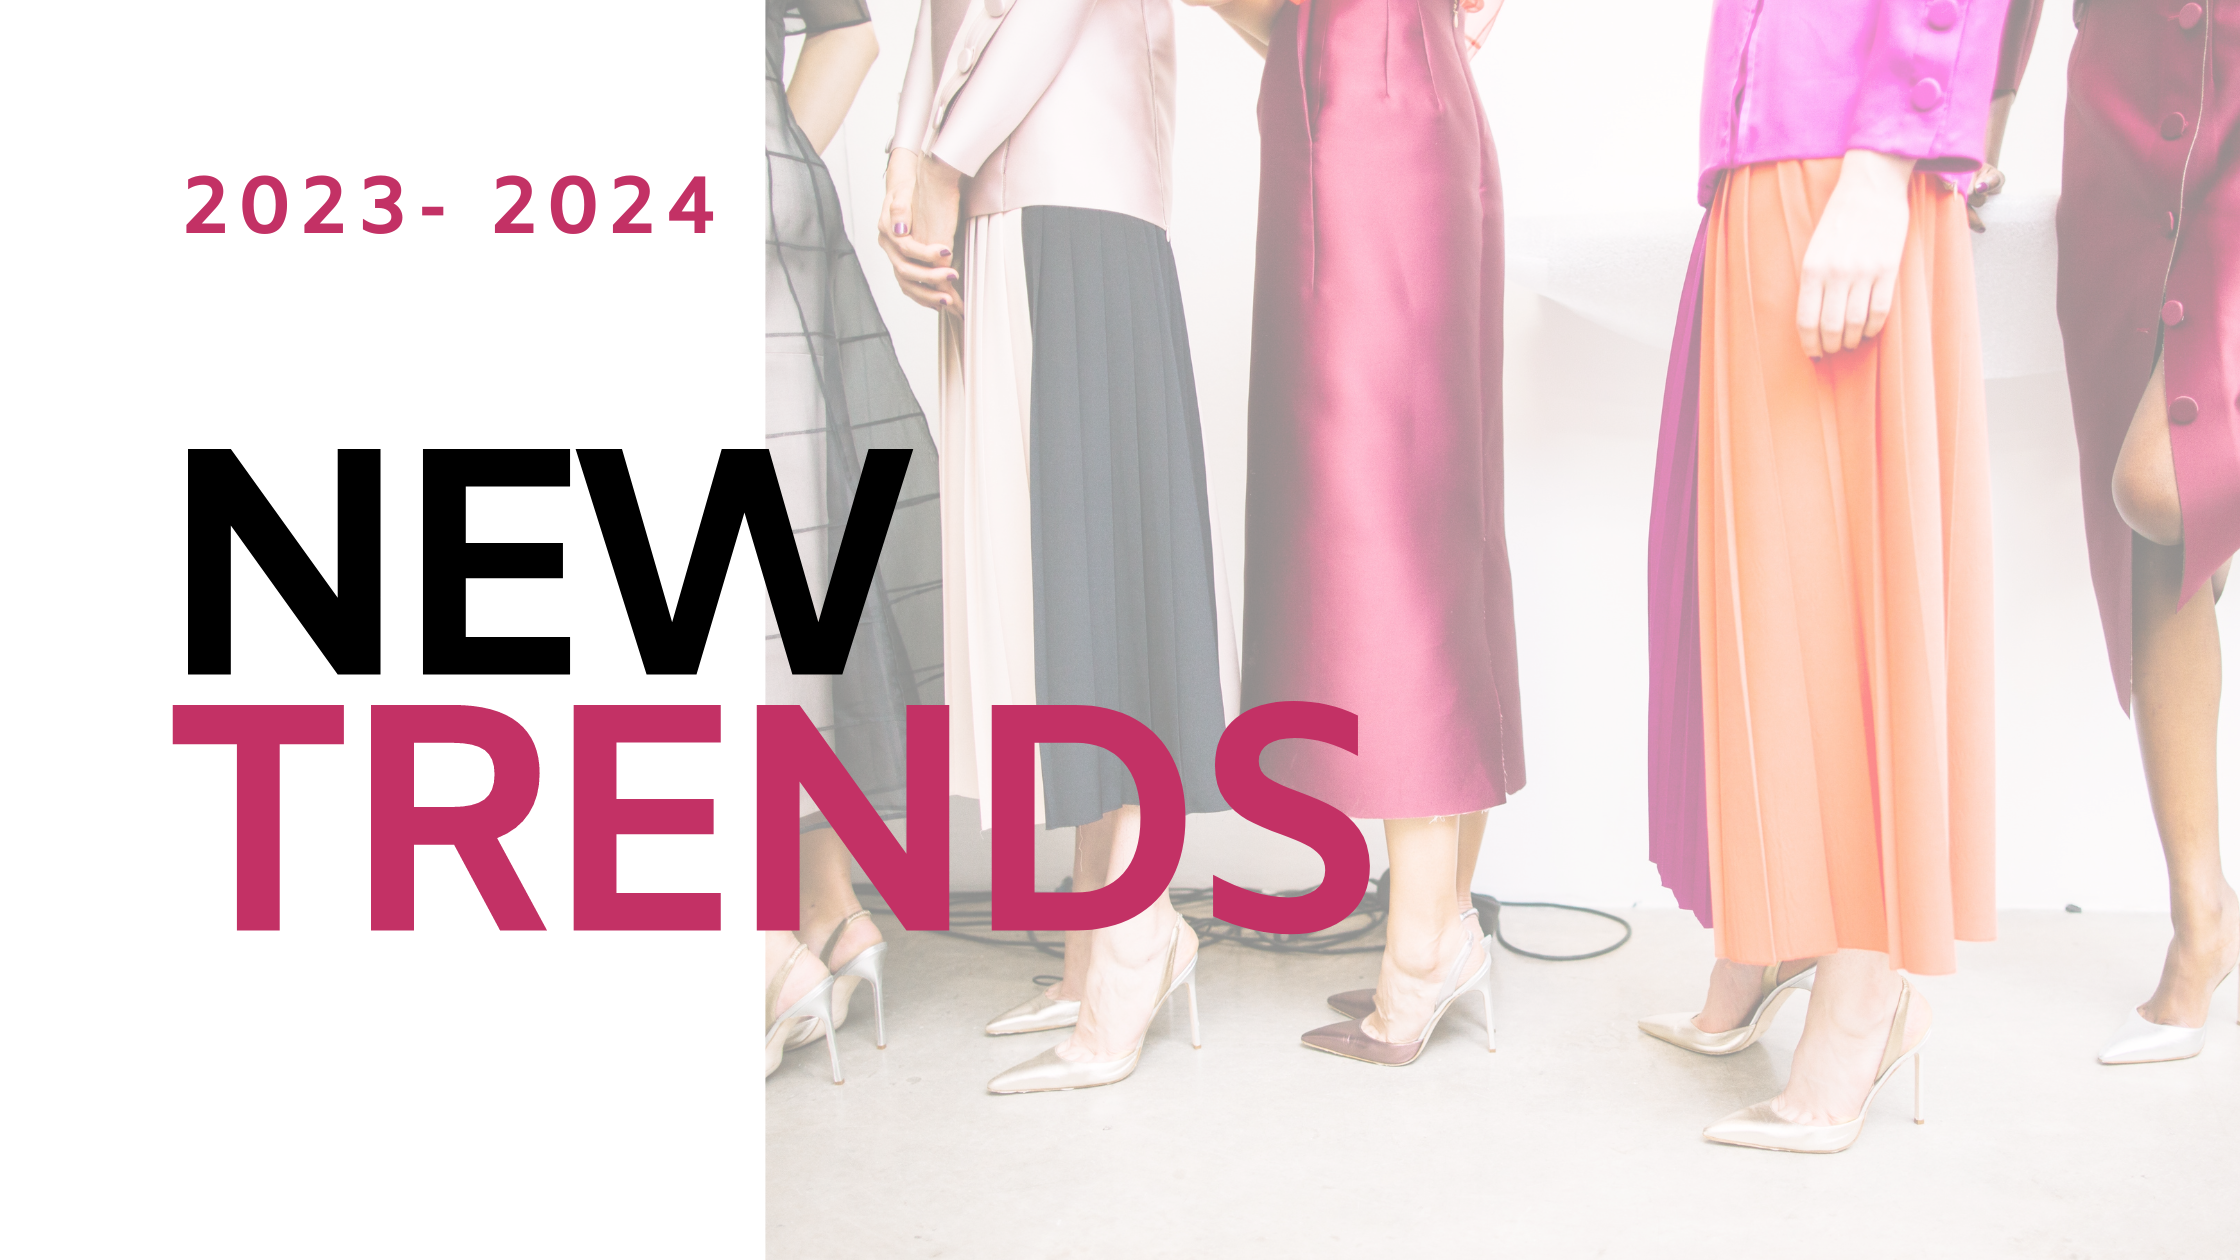 10 Must-Have Fall Fashion Trends for 2023 – 2024